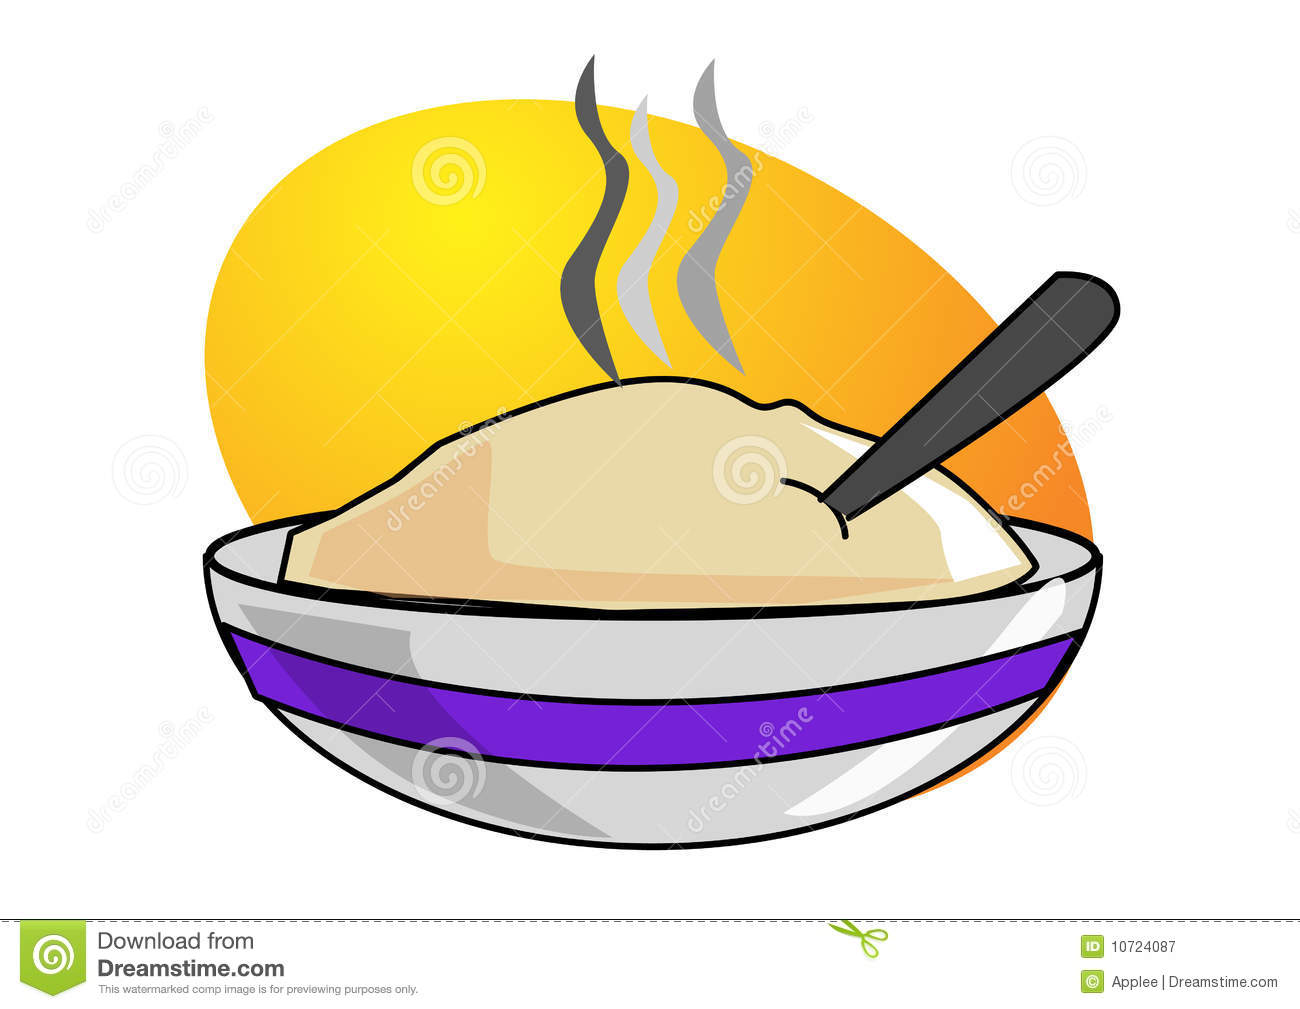 Oatmeal In Bowl Royalty Free Stock Photography   Image  10724087